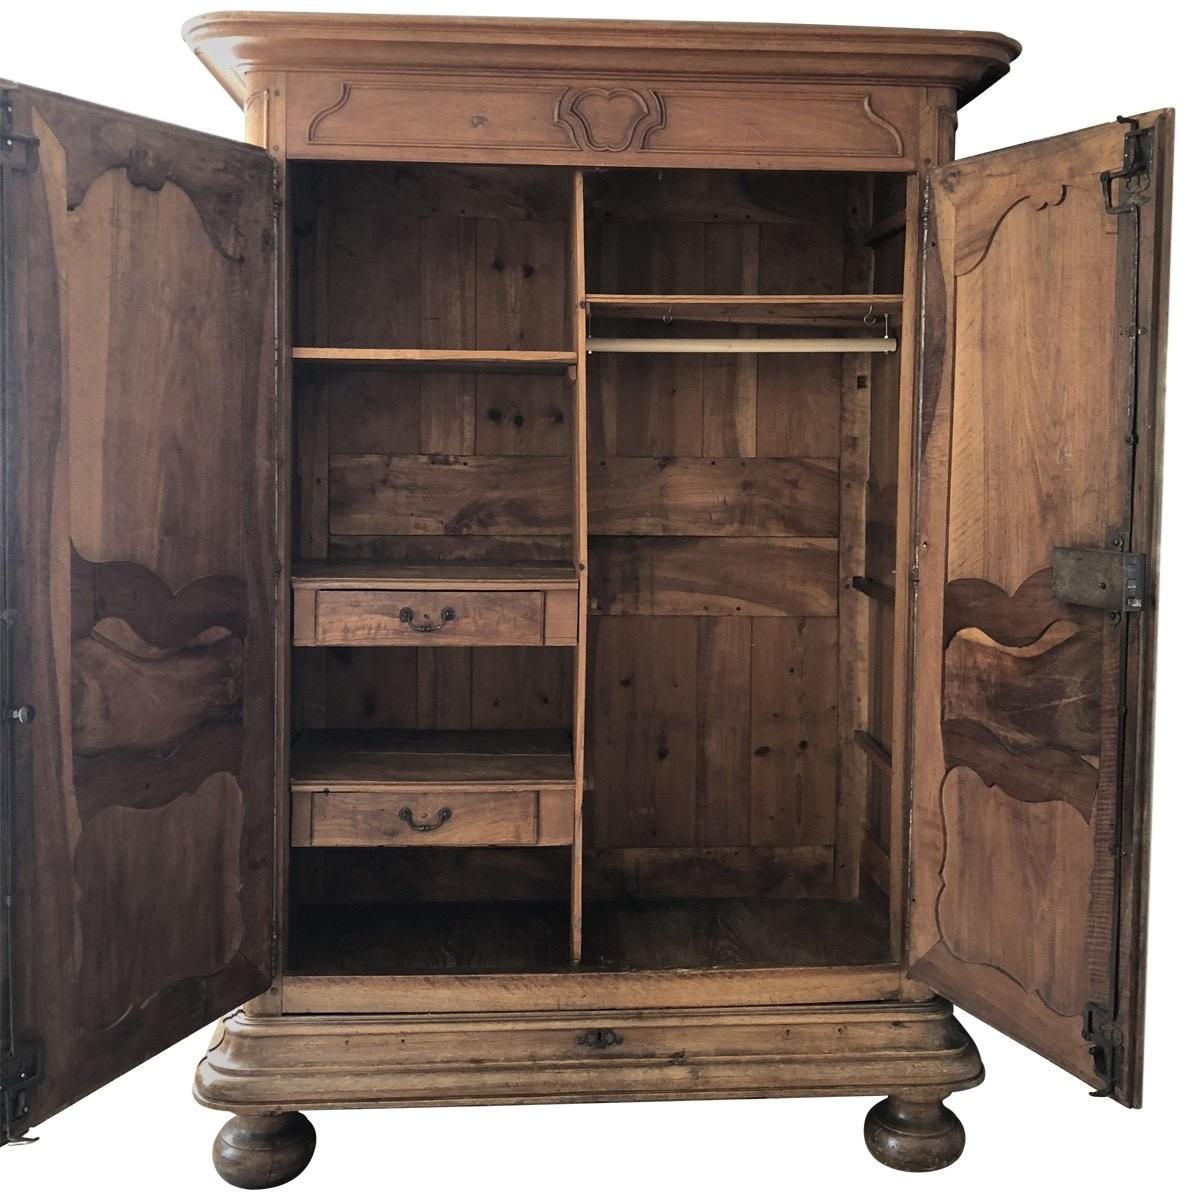 Very large beautiful 18th century French Louis XV hand carved solid cherrywood wardrobe having raised and recessed door panels with flowing curves and beaded edges. The doors are mounted on external steel hinges with filigree steel key guards and